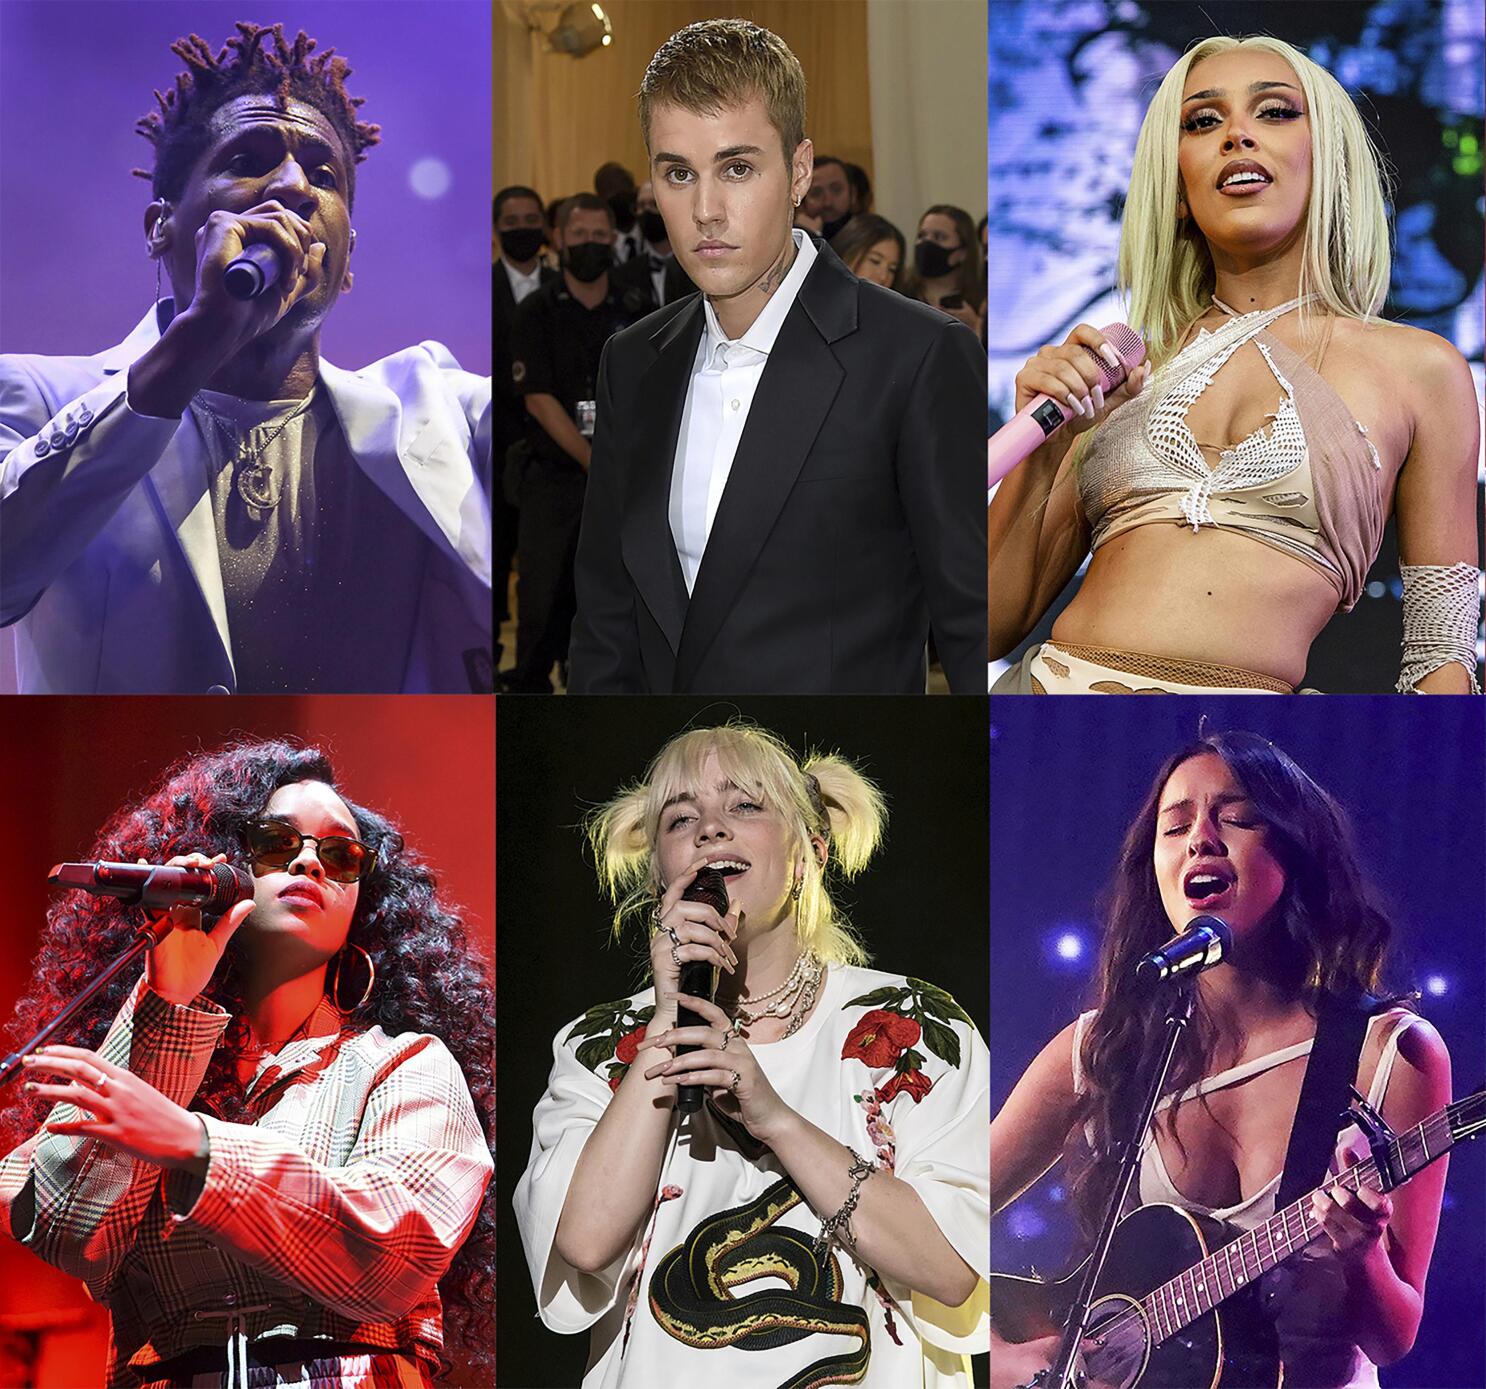 Grammys 2022: Why Justin Bieber's 'Peaches' has 11 songwriters